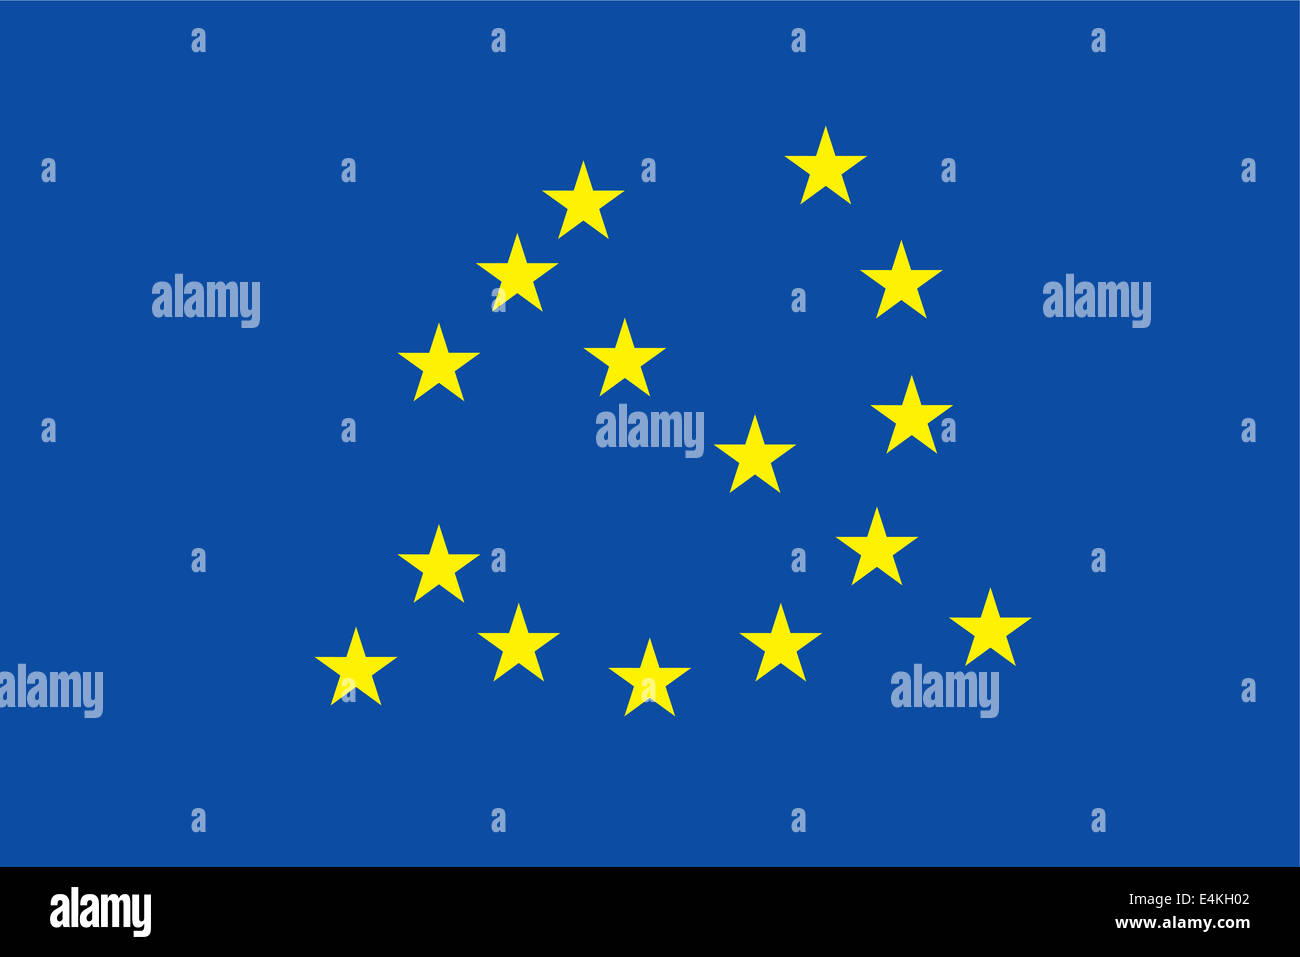 euro flag with communism symbol, return of nazism in europe concepts Stock Photo